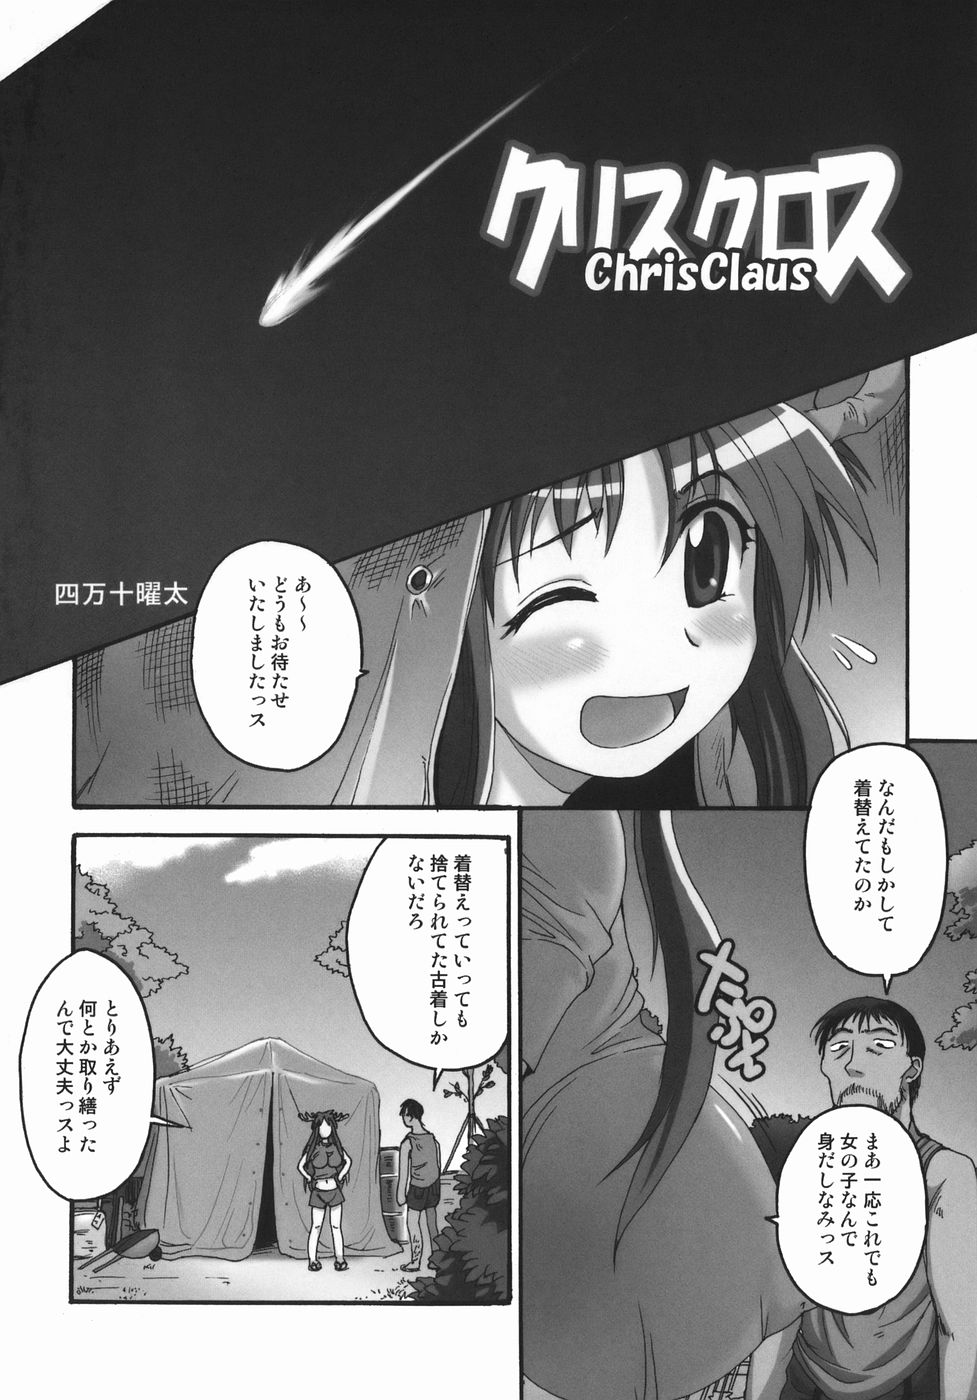 [Shimanto Youta] Chris Claus page 8 full